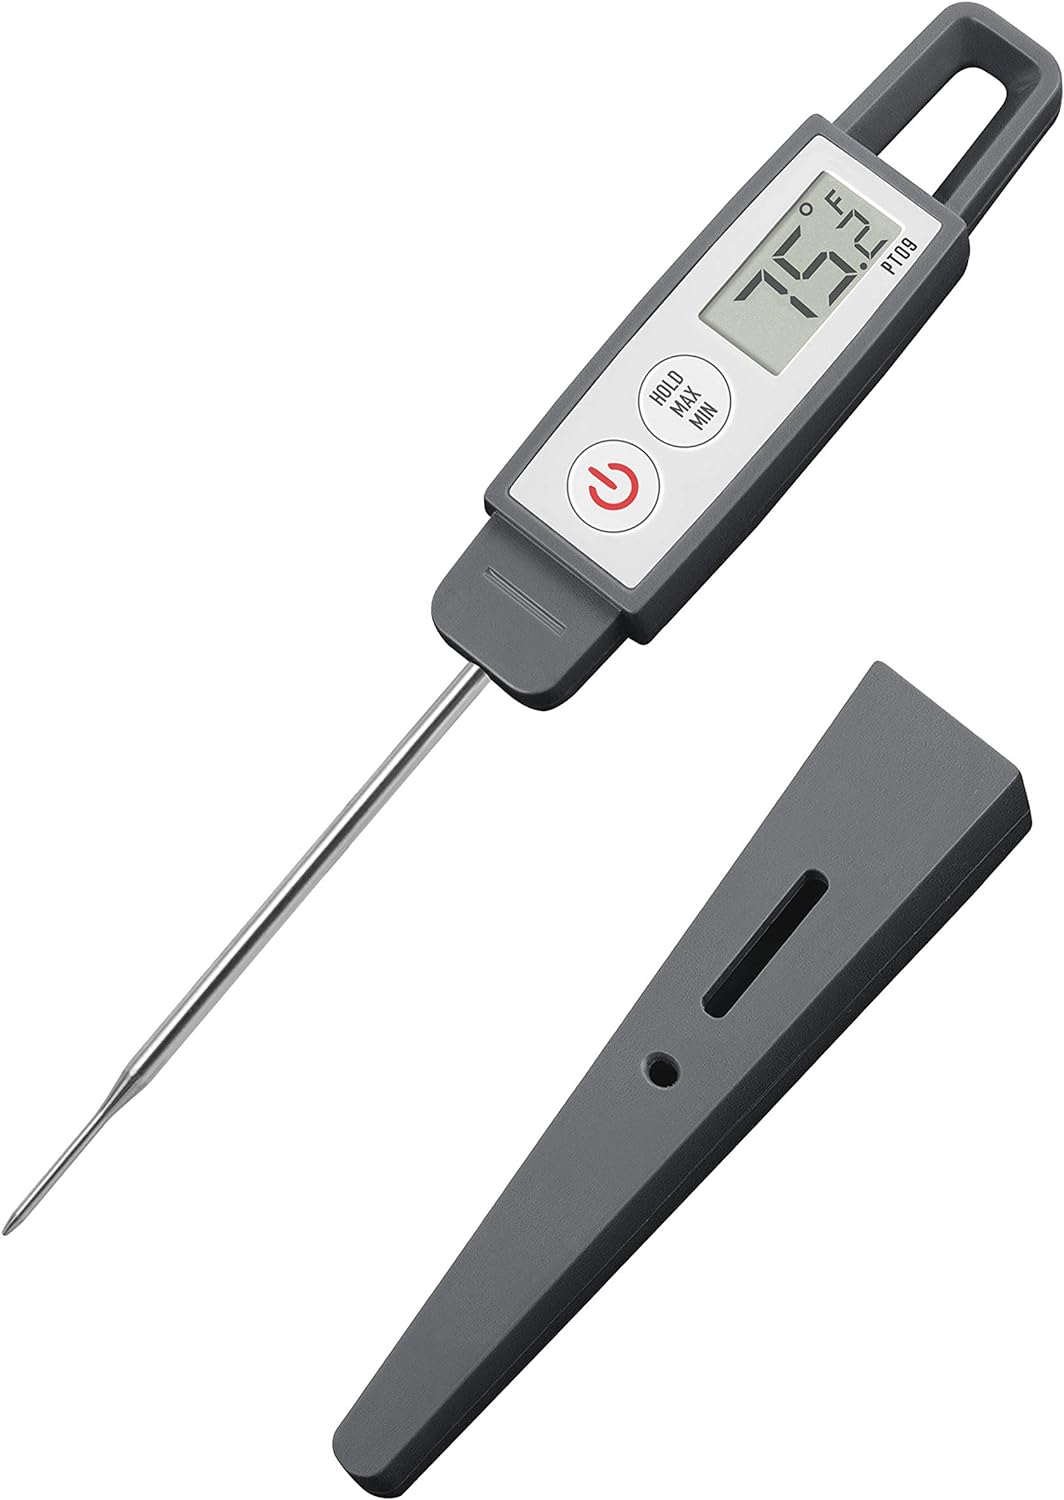 Lavatools PT09 Super-Quick Commercial Grade Digital Thermometer for Cooking, Meat, Candy, Candle, Liquid, Oil, 4.5 Compact Probe, Splash Proof, °C/°F Toggle, Hold Function - Sesame